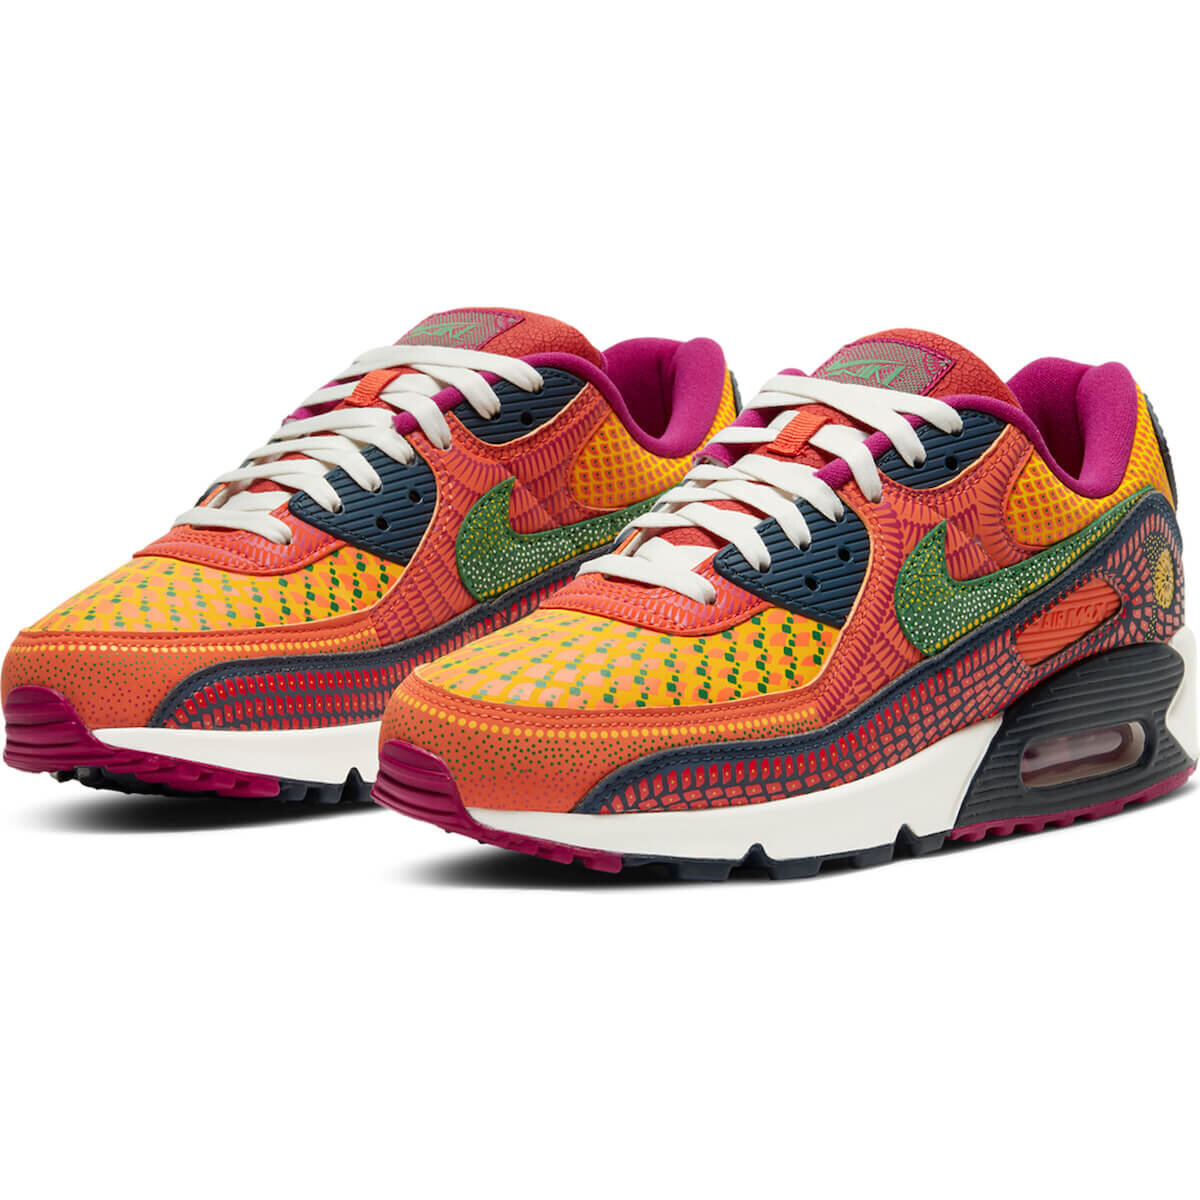 CNK-Nike-Dia-De-Los-Muertos-Collection-Air-Max-90-Side-Overview.jpg